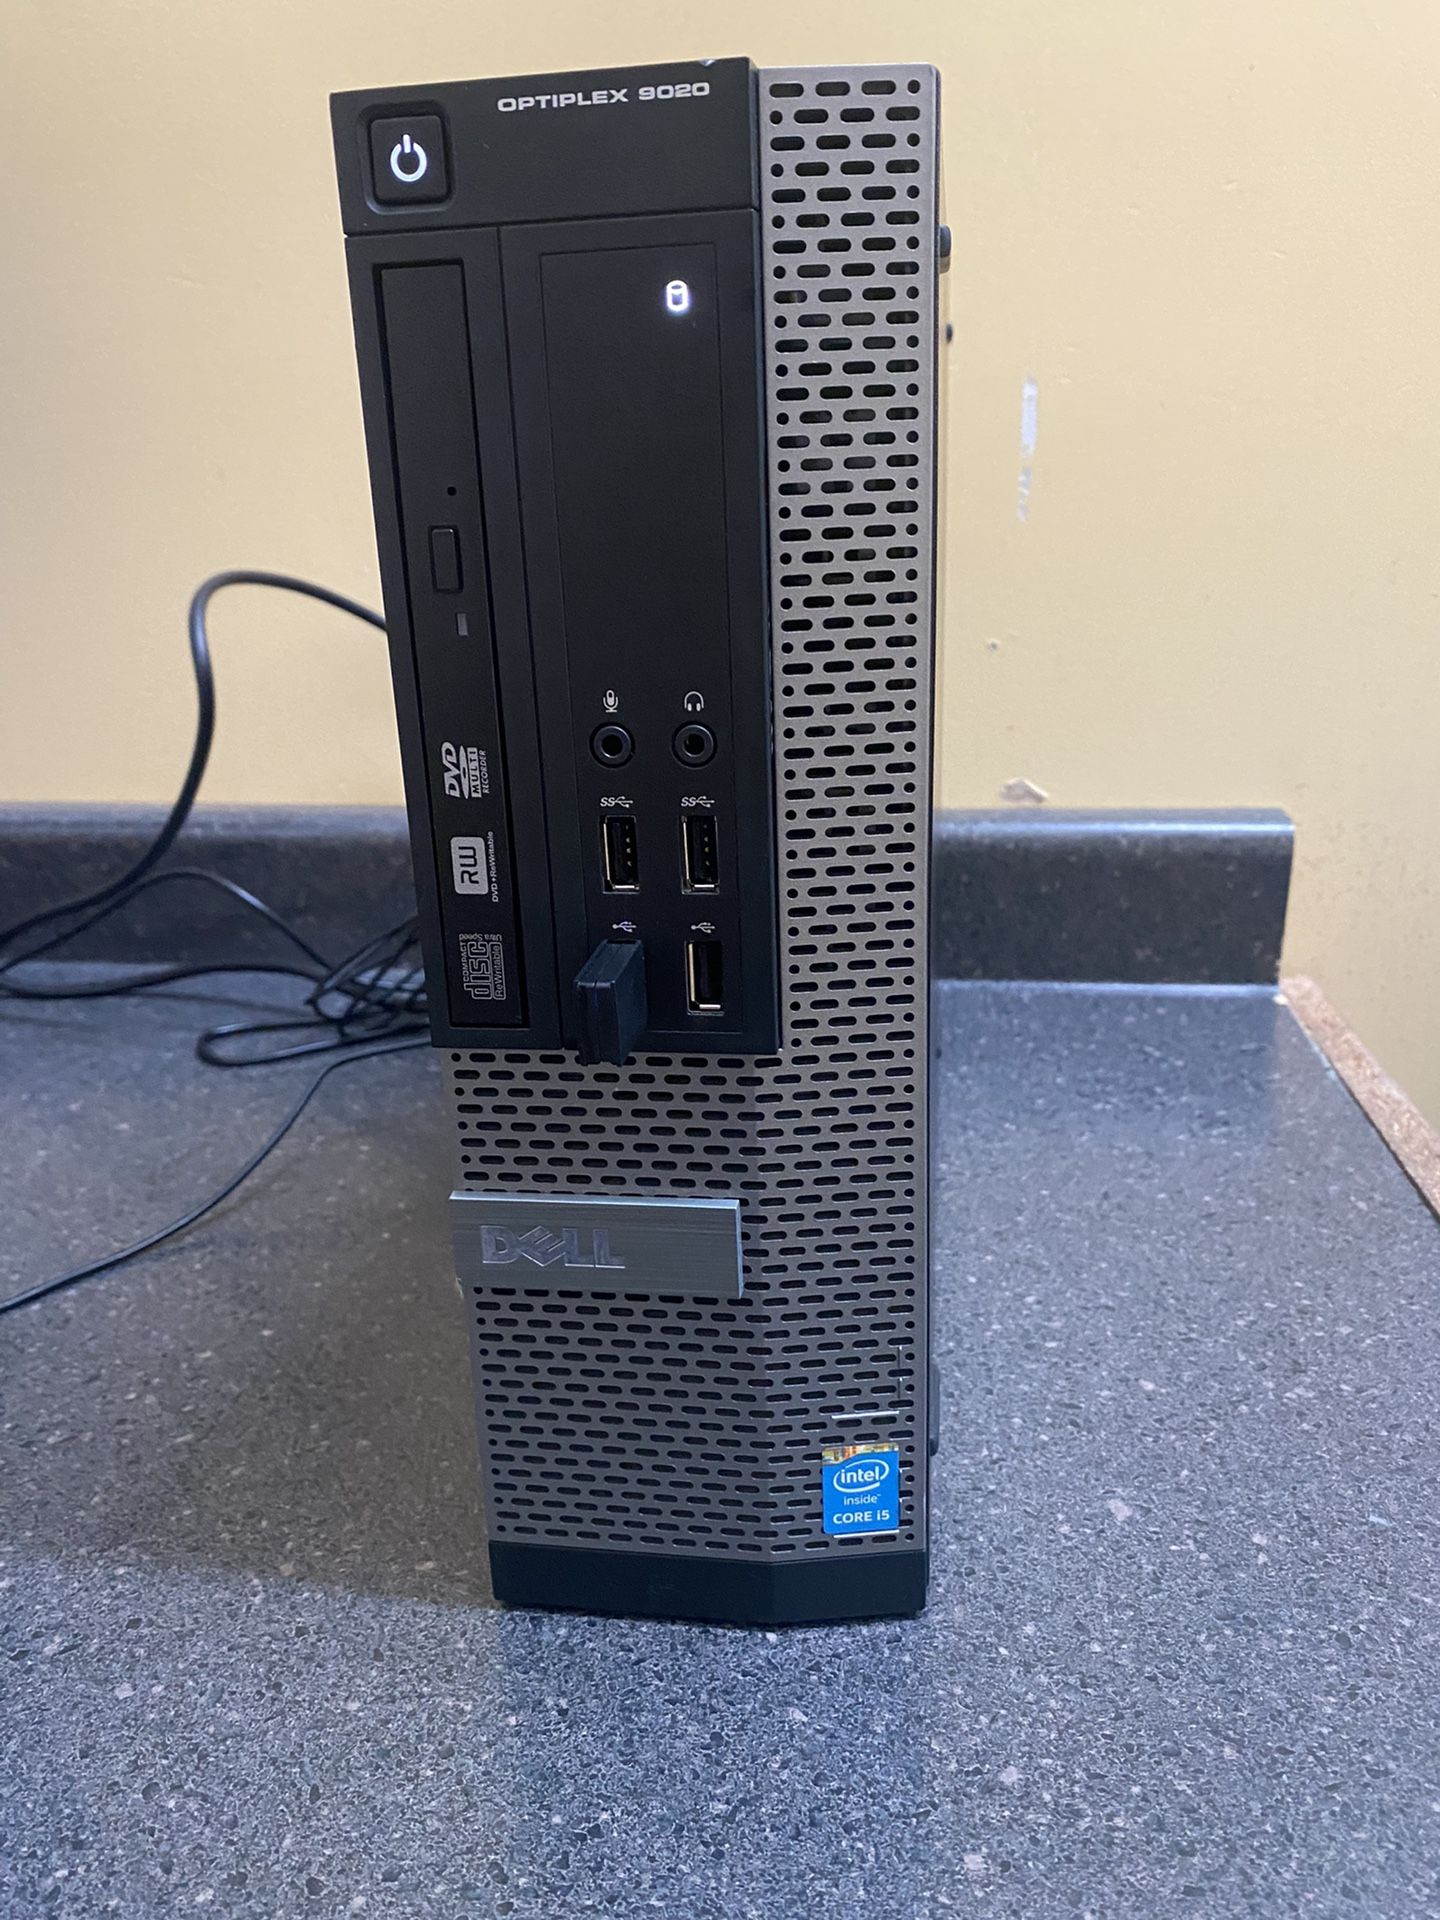 Dell Optiplex 9020 SFF, Intel Core i5, 8gb ram, Windows 10 , USB wifi adapter, 500gb HDD, comes with power cable.   Only the PC ( Tower) a power cable